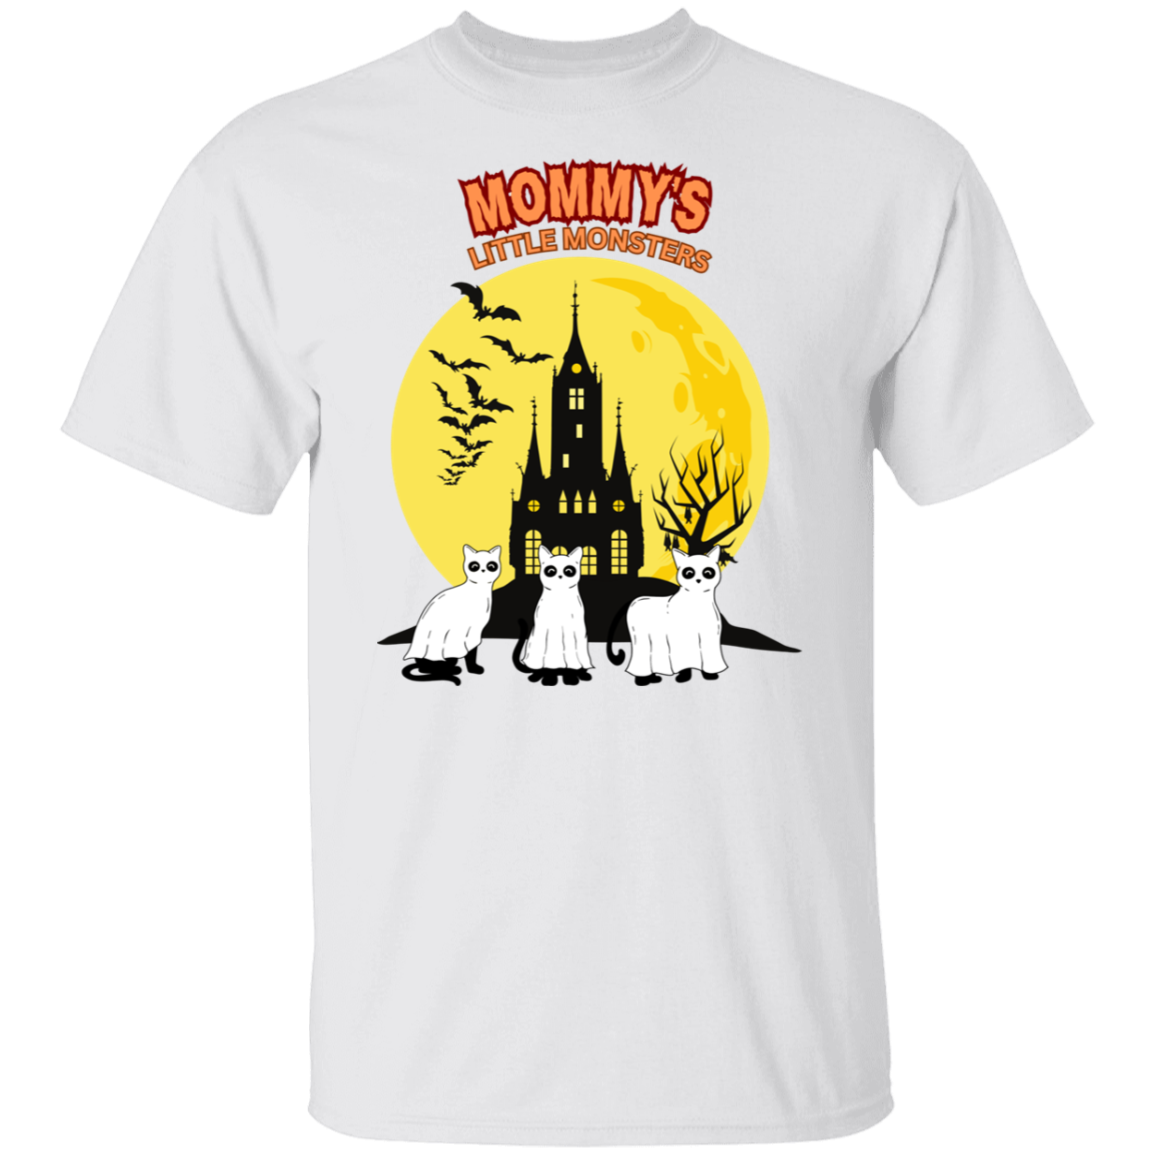 Mommy's Little Monsters (Cats) T-Shirt